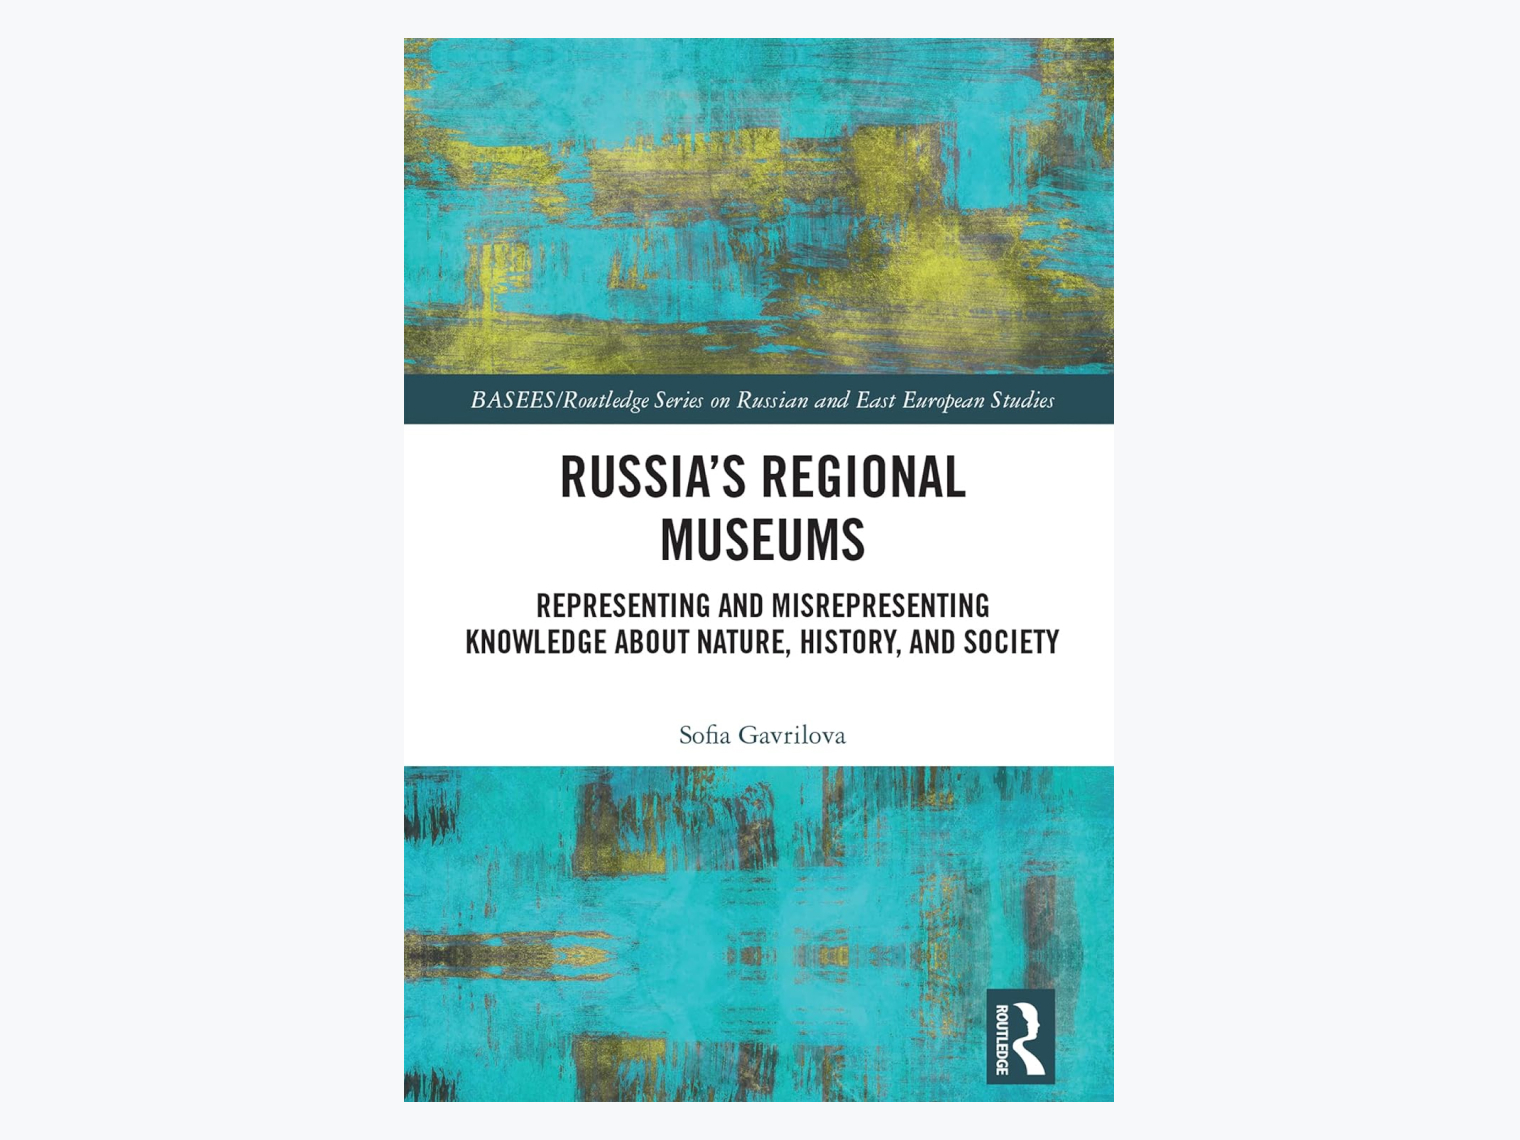 Russia’s Regional Museums. Representing and Misrepresenting Knowledge about Nature, History and Society © routledge.com